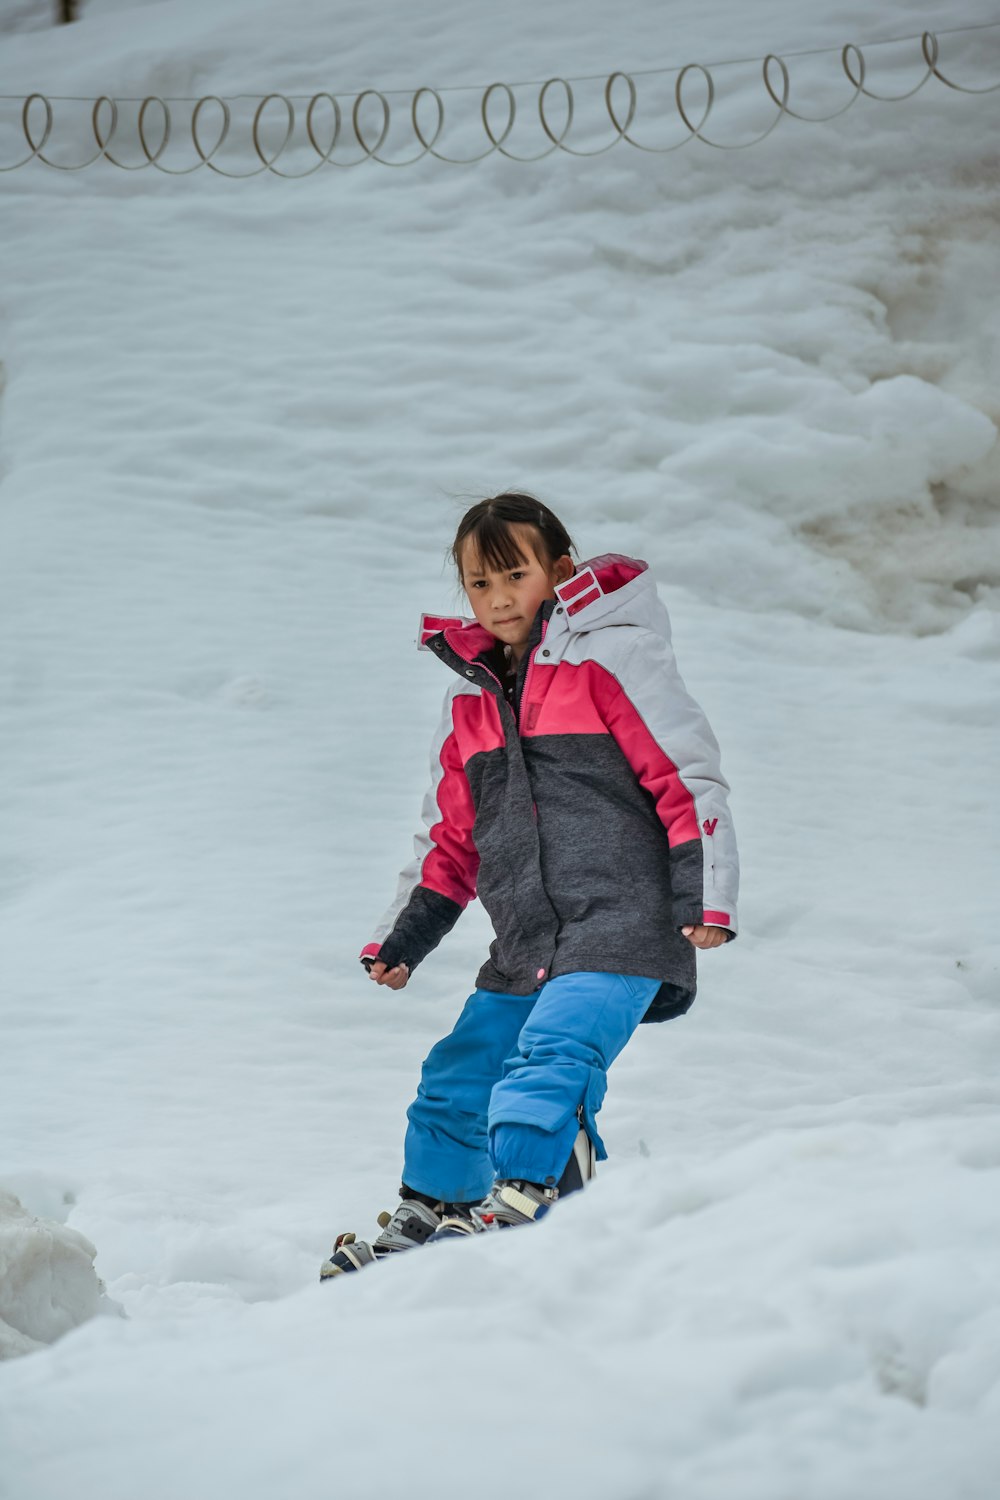 a young girl riding a snowboard down a snow covered slope